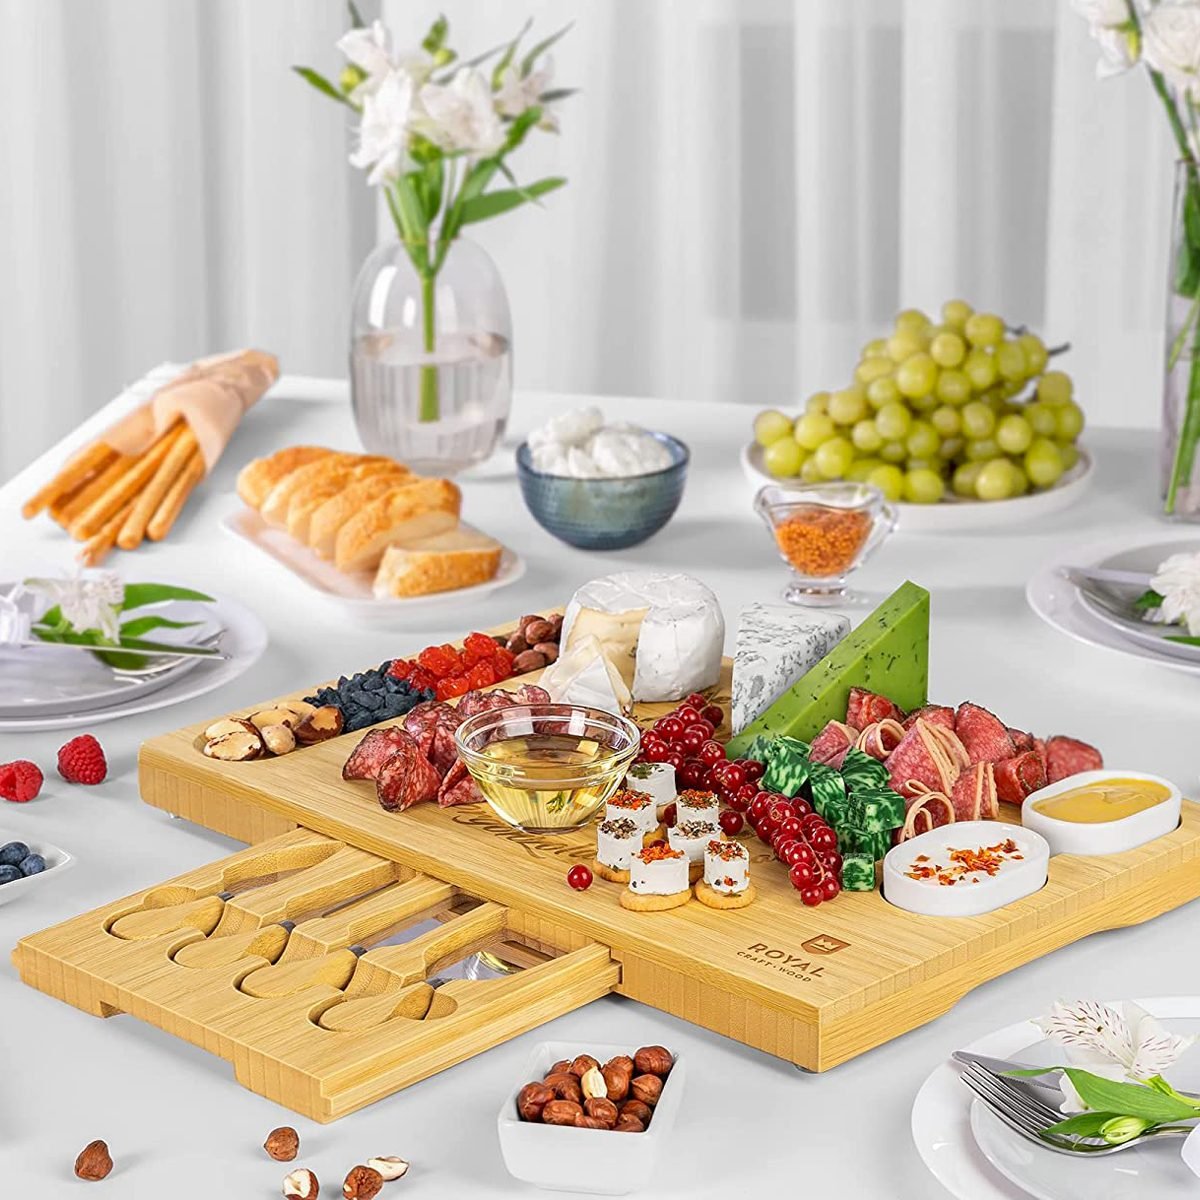 https://www.tasteofhome.com/wp-content/uploads/2022/10/Unique-Bamboo-Cheese_Board_ecomm-amazon.com_.jpg?fit=700%2C700